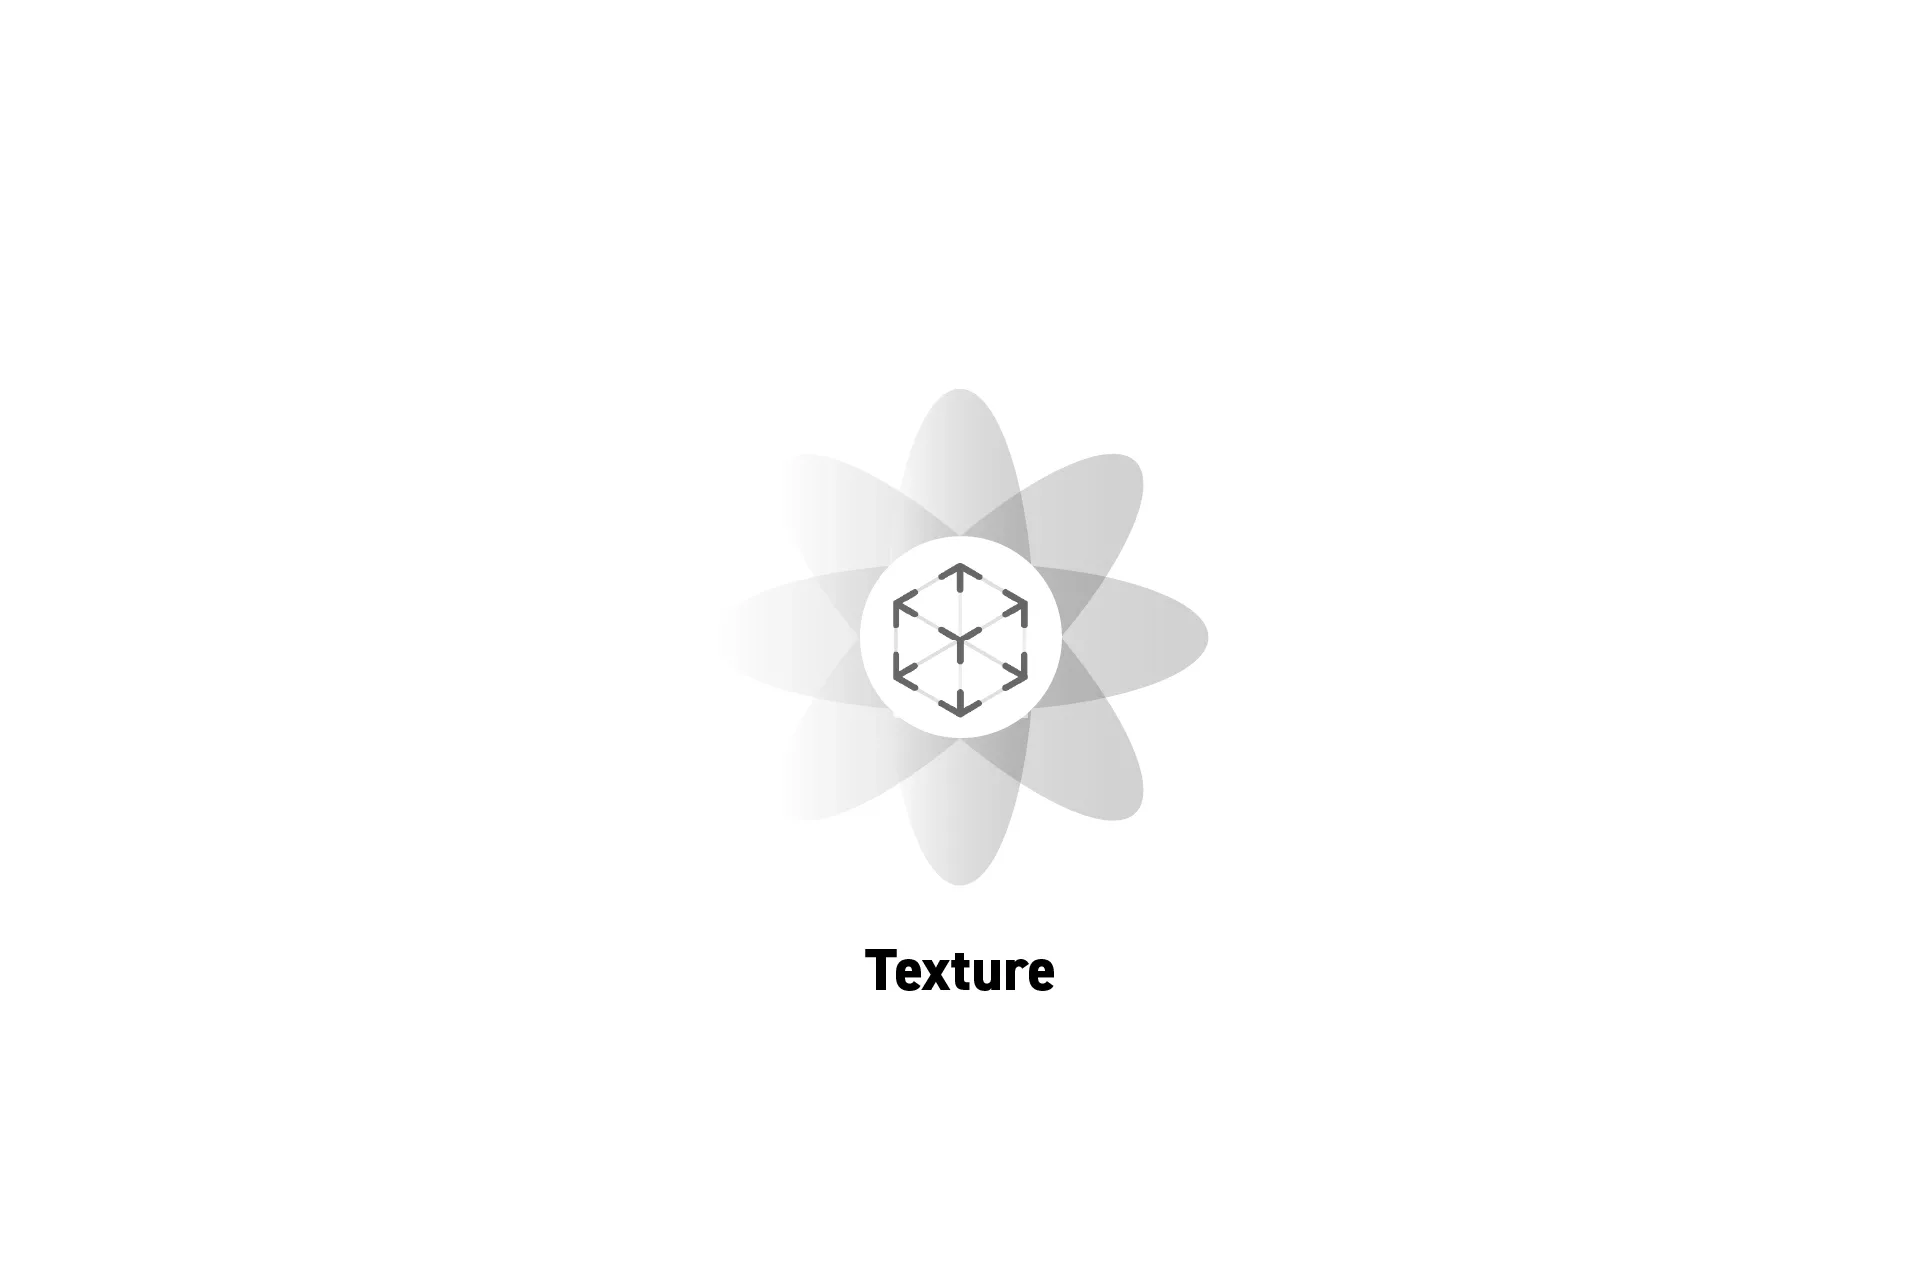 A flower that represents spatial computing with the text "Texture" beneath it.